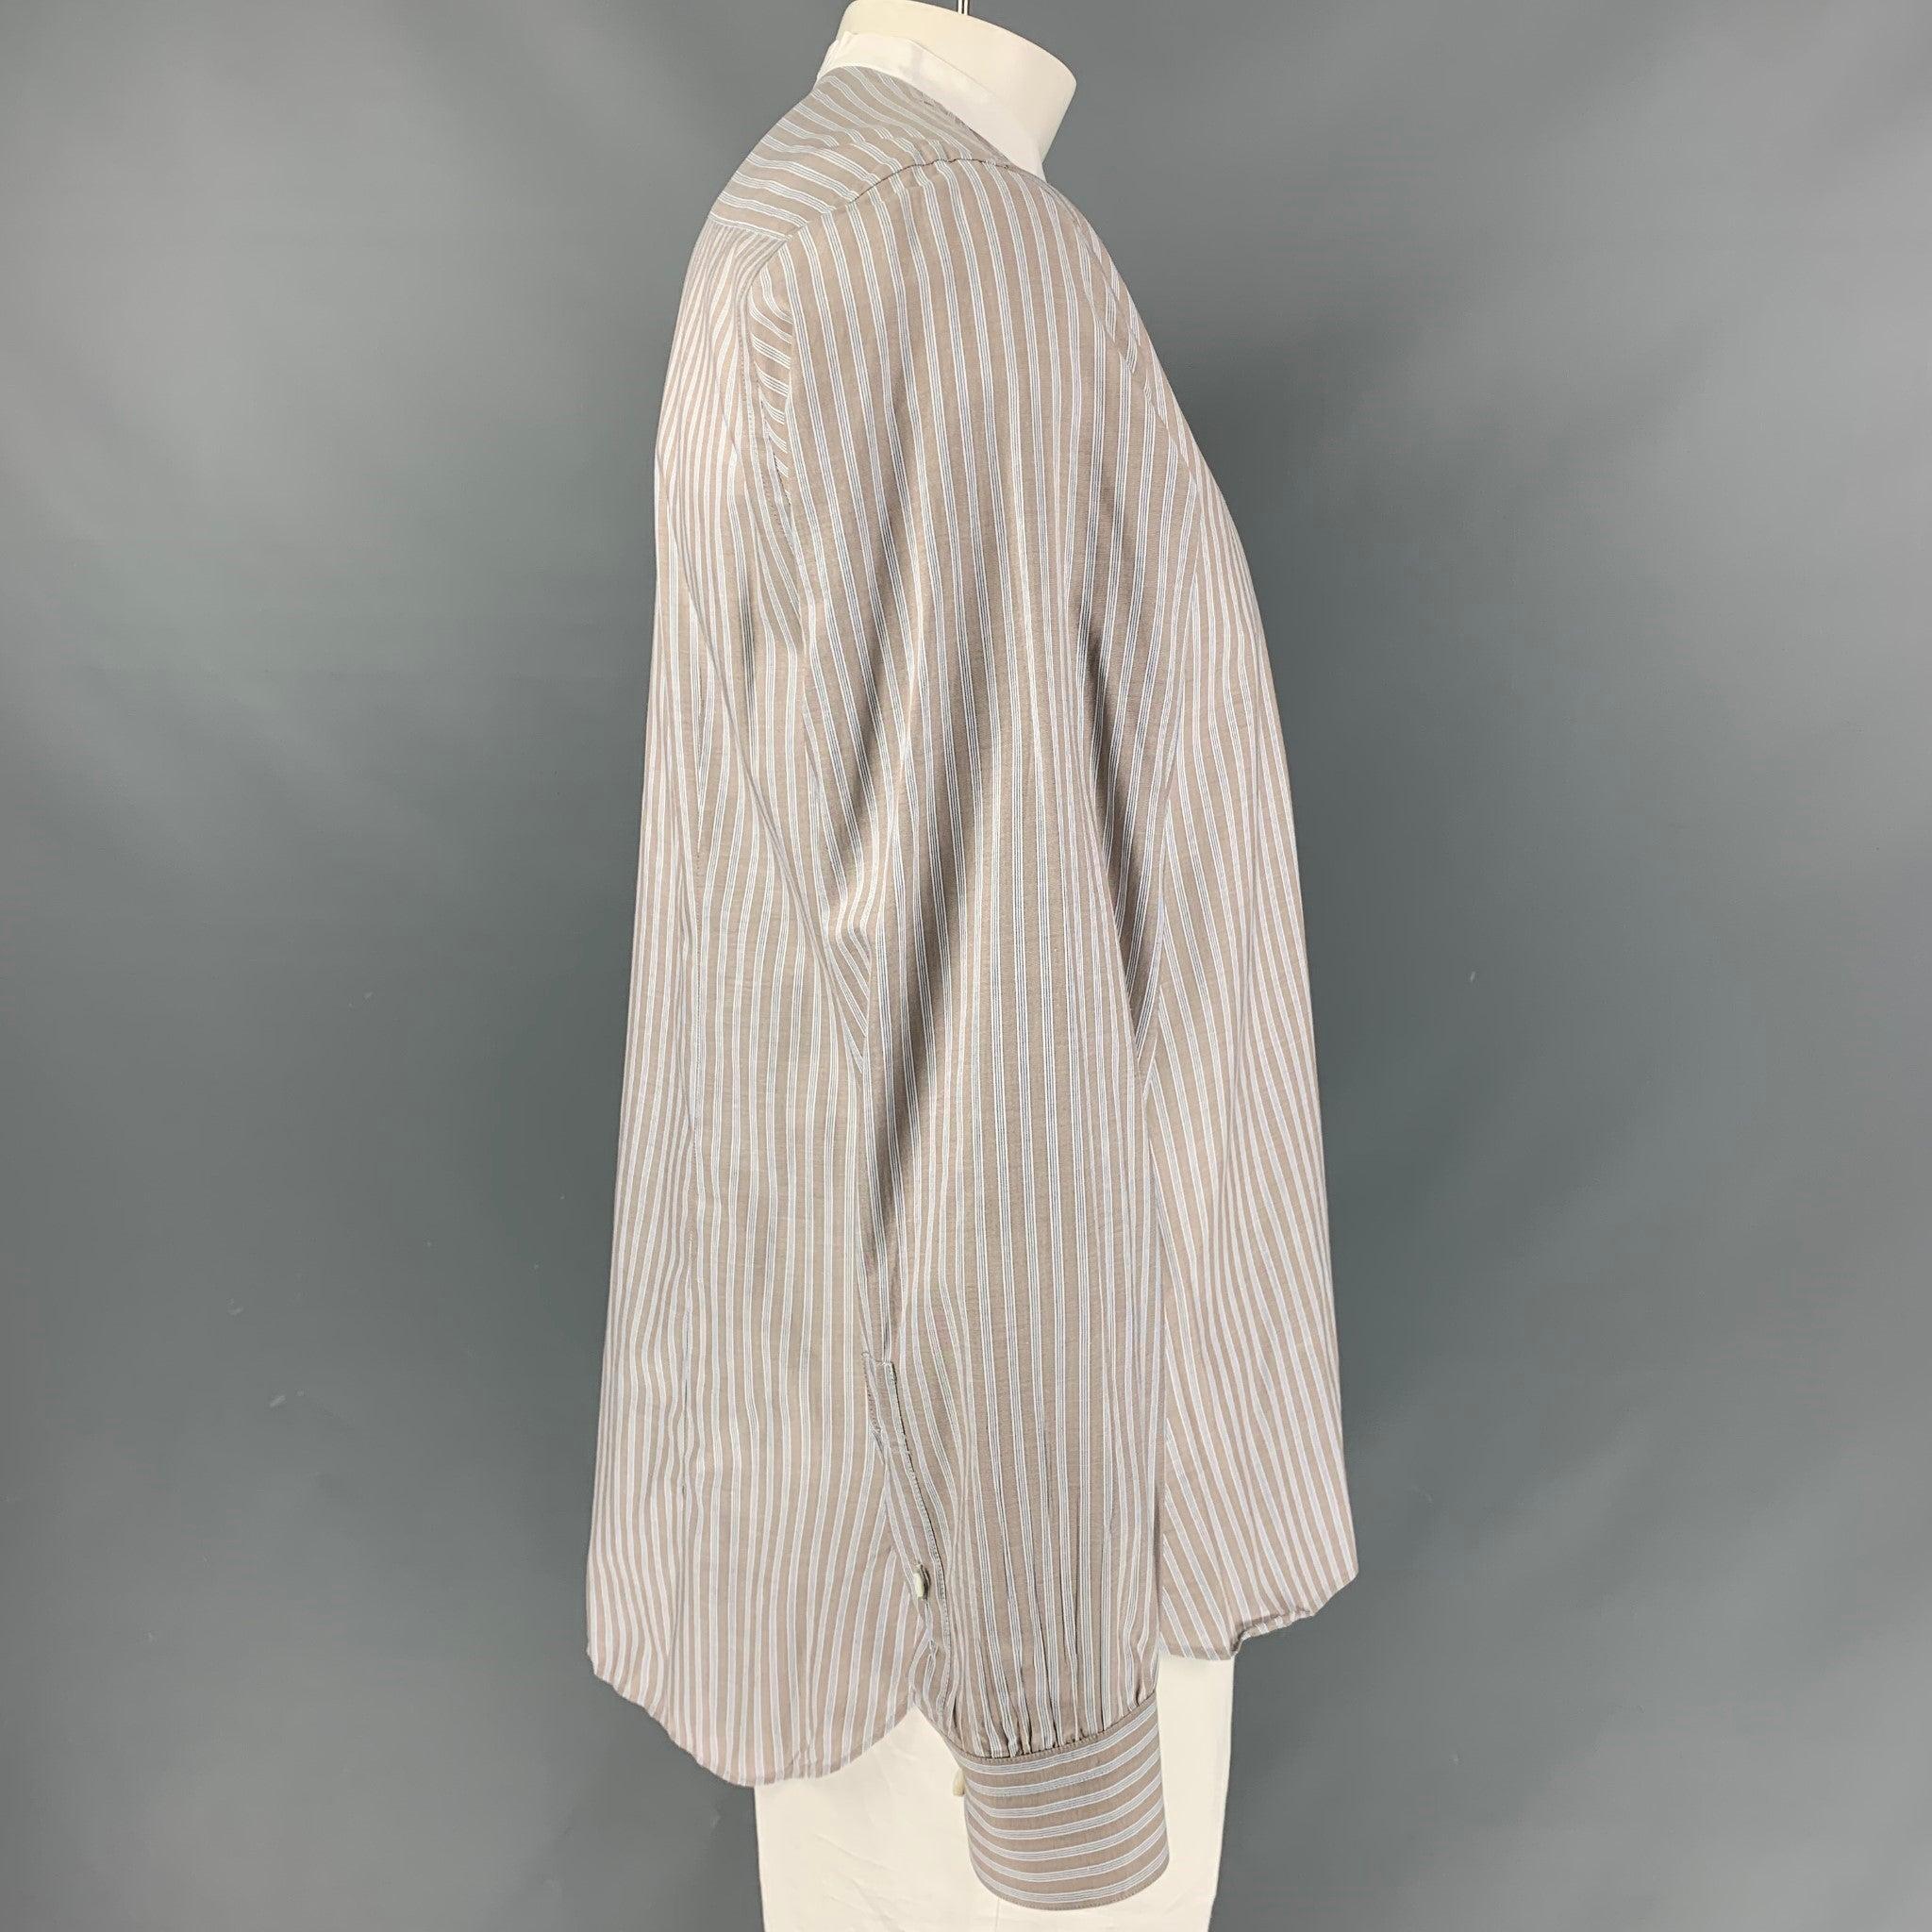 BAMFORD & SONS long sleeve shirt comes in taupe and white stripped cotton featuring nehru collar, button down closure, and two buttons angle cuffs. Made in Italy.Excellent Pre-Owned Condition. 
 

 Marked:  L 
 

 Measurements: 
  
 Shoulder: 17.5